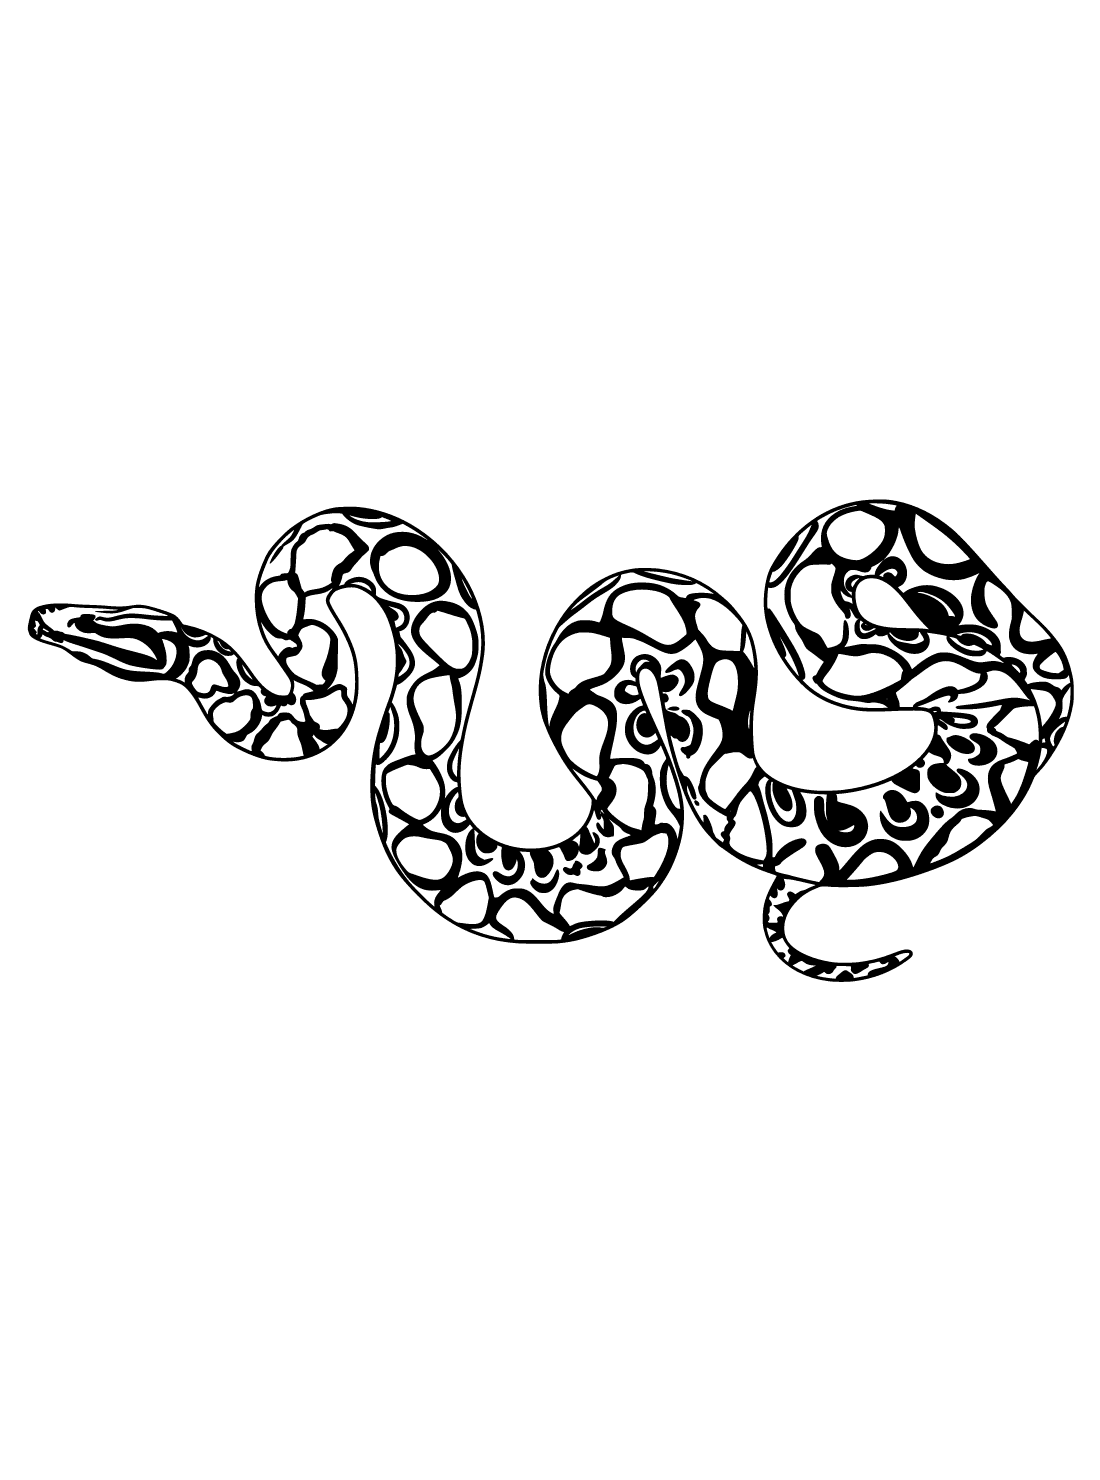 Free snake coloring pages